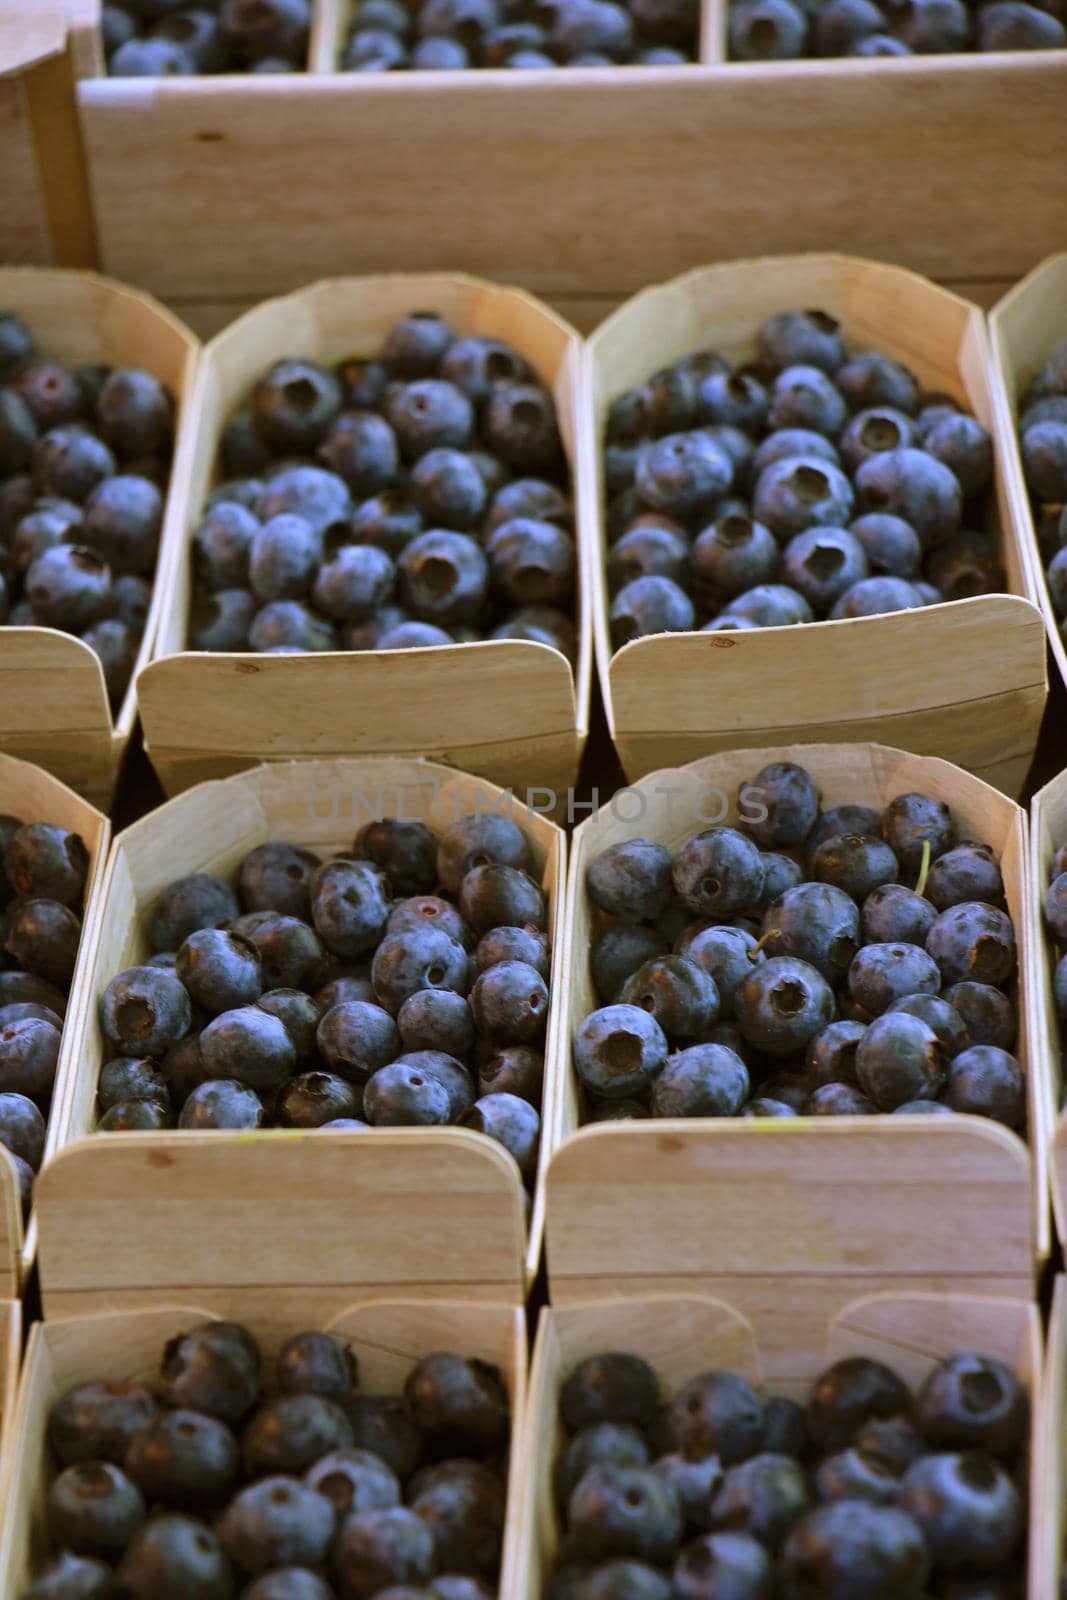 Blueberries  in small boxes on a market stall